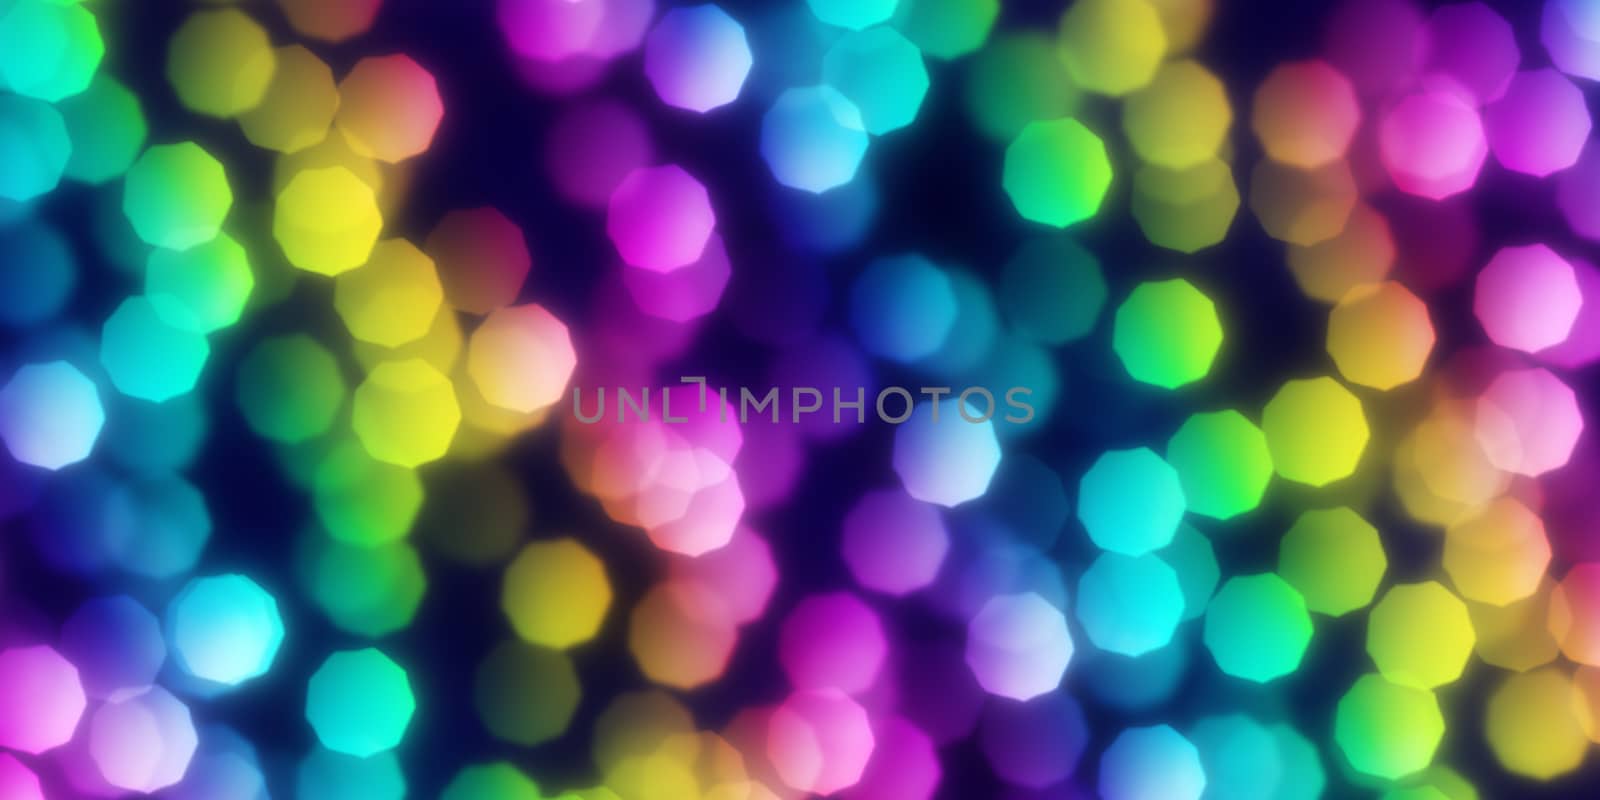 Rainbow Pentagon Shapes Bokeh Background. Abstract Figure Night Lights Texture. Abstract Glowing Forms Backdrop. by sanches812